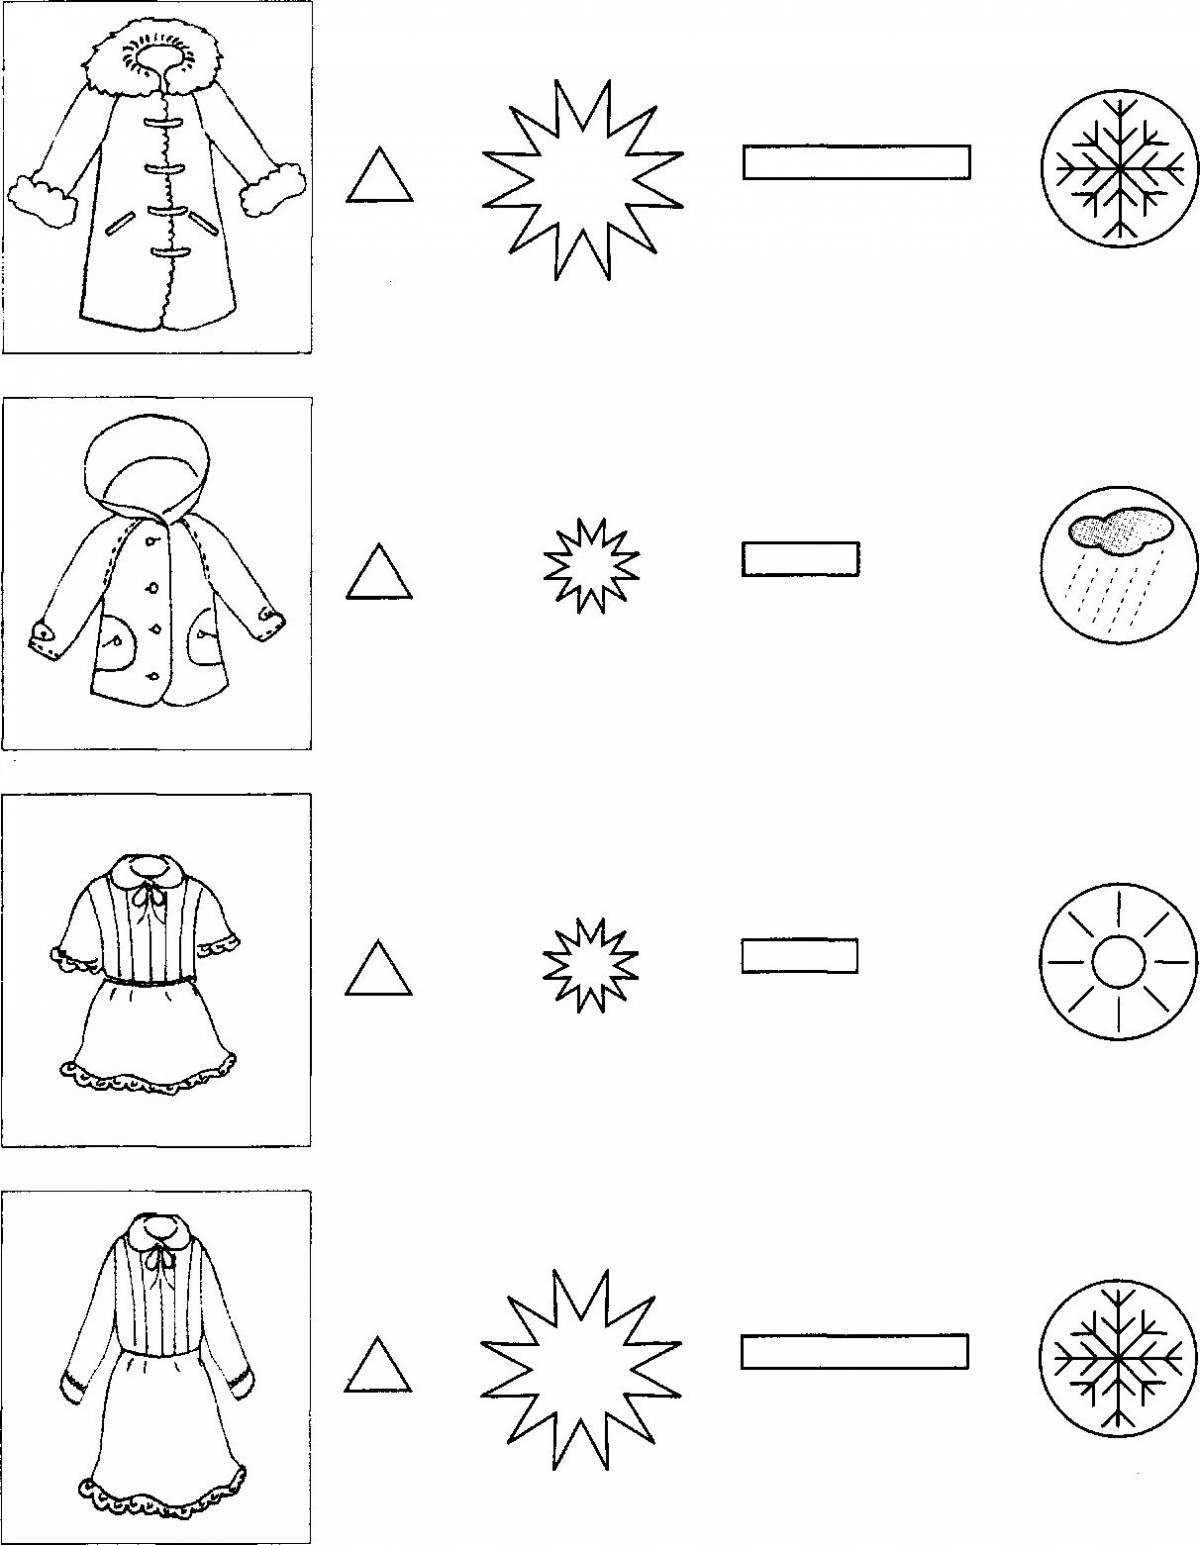 Awesome clothes coloring page